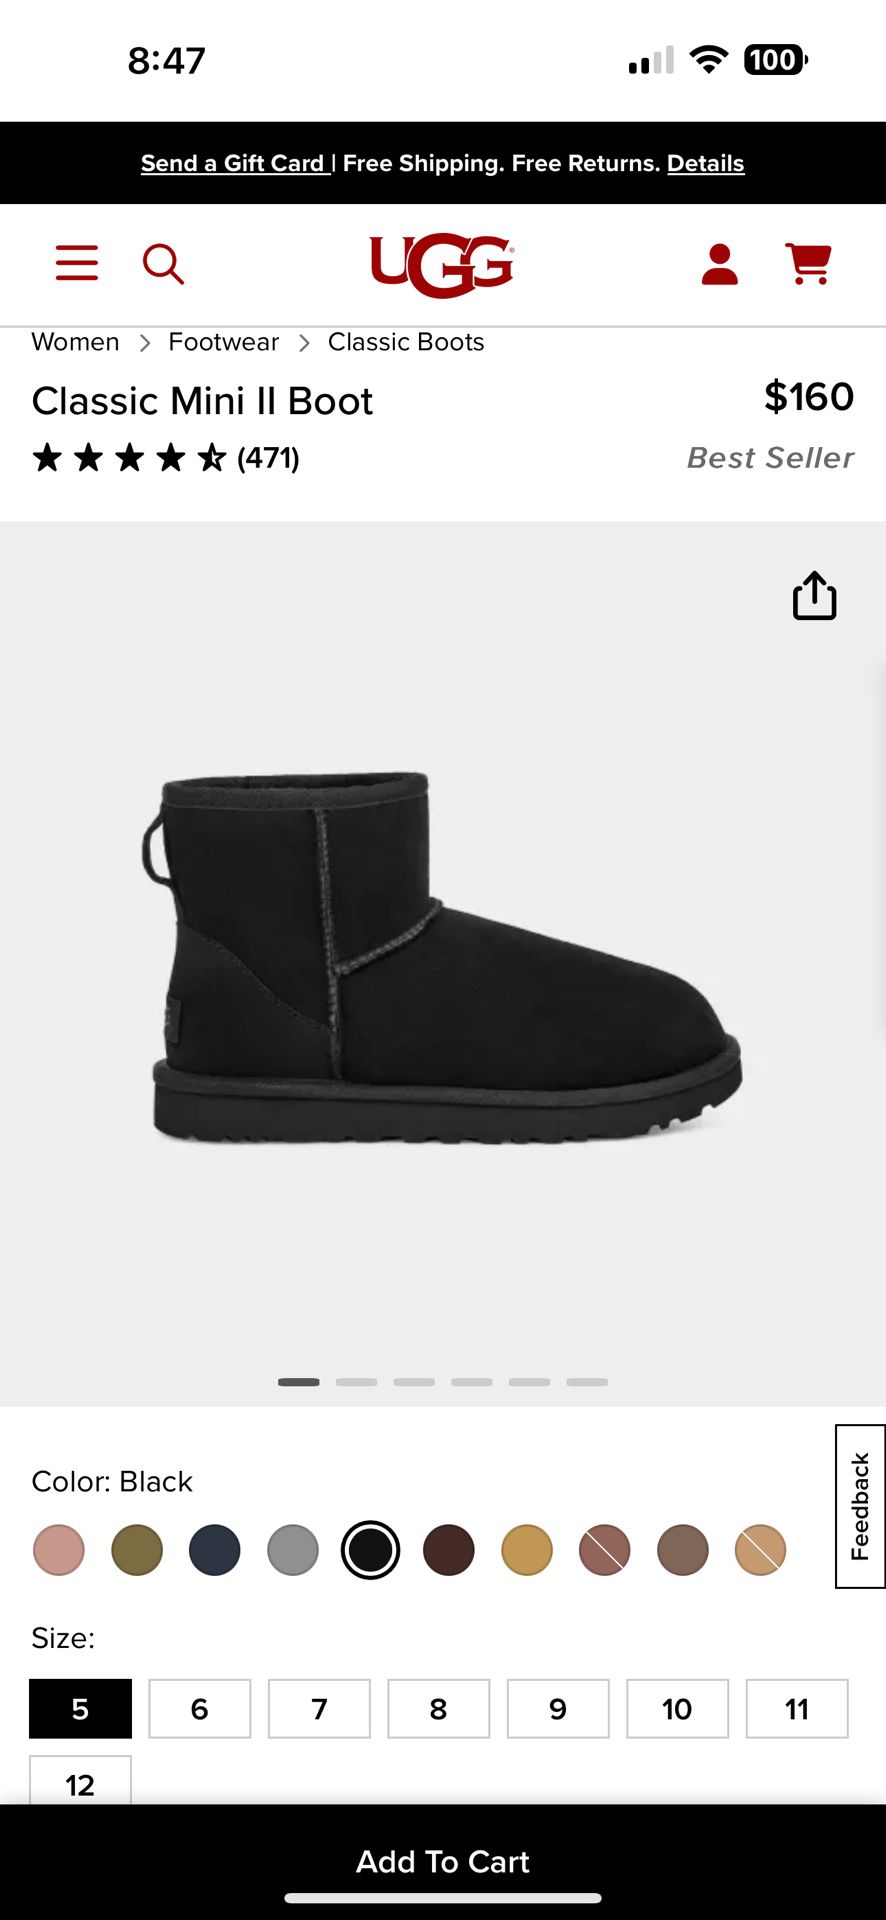 UGG Classic Mini Boot. Black. Size 6W and 5W Available.